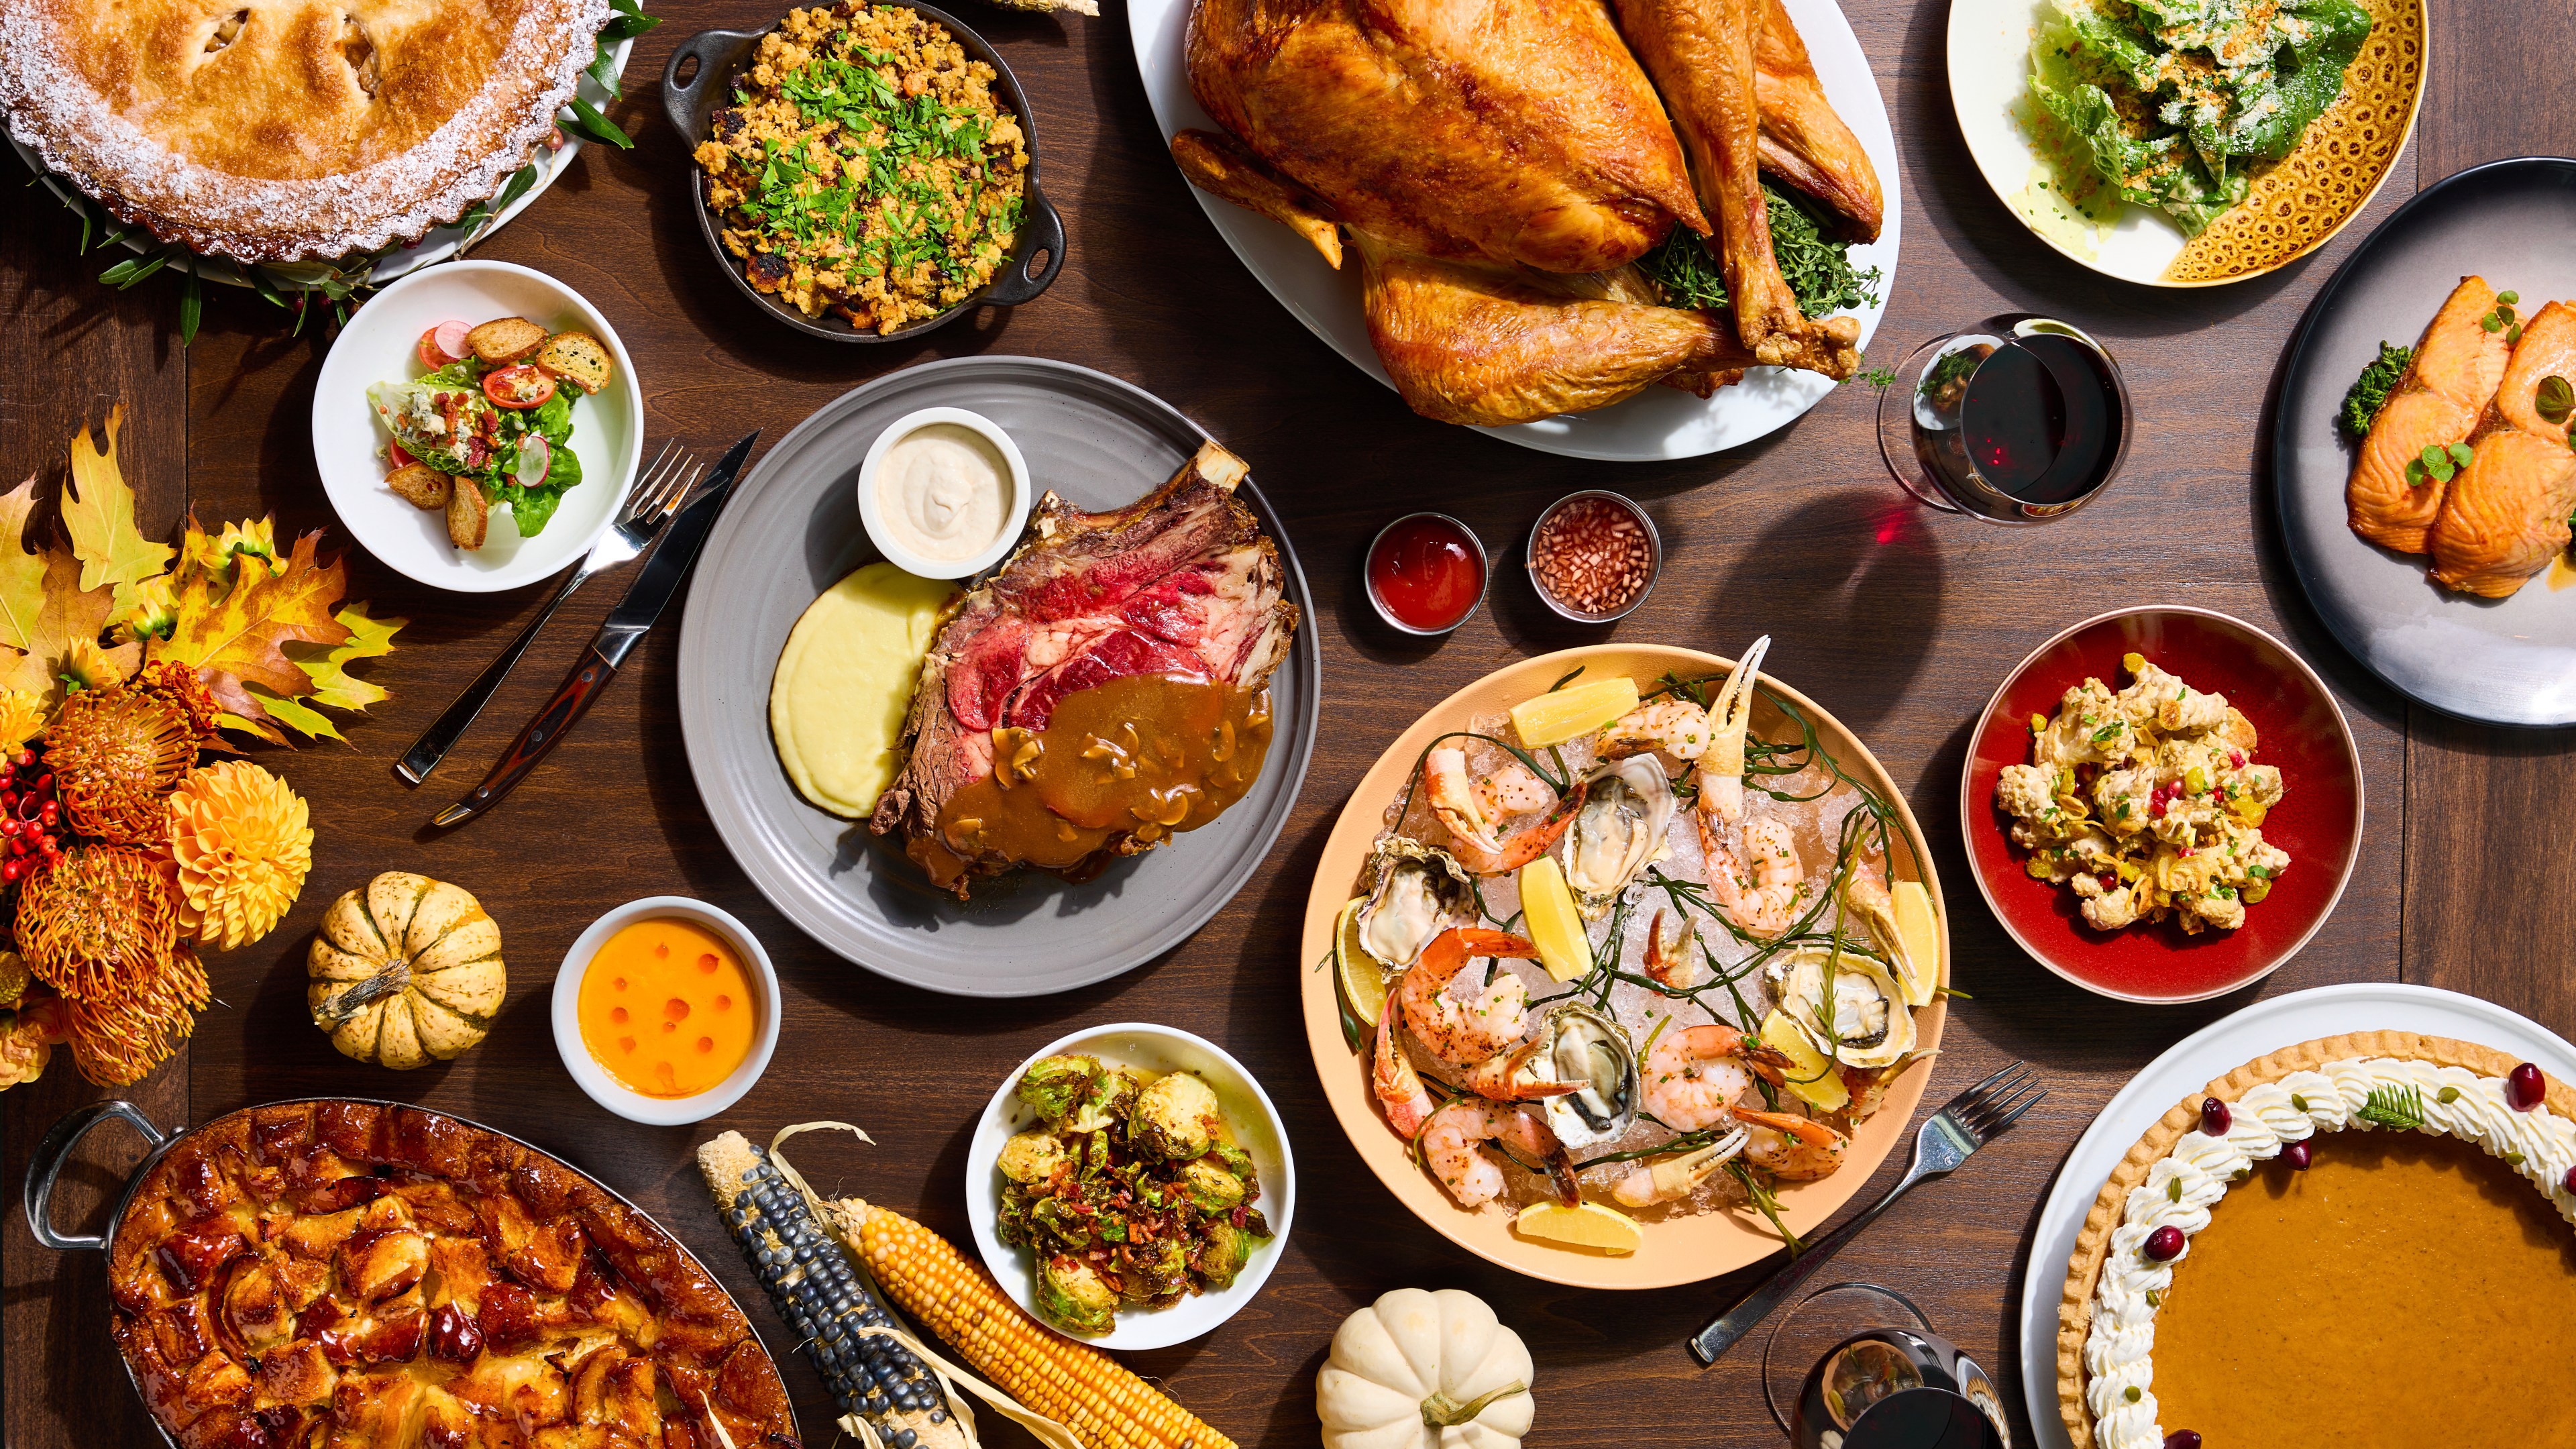 A spread of decadent dishes by San Francisco restaurant International Smoke House is laid out on a table and features turkey, chilled shellfish and various Thanksgiving sides.